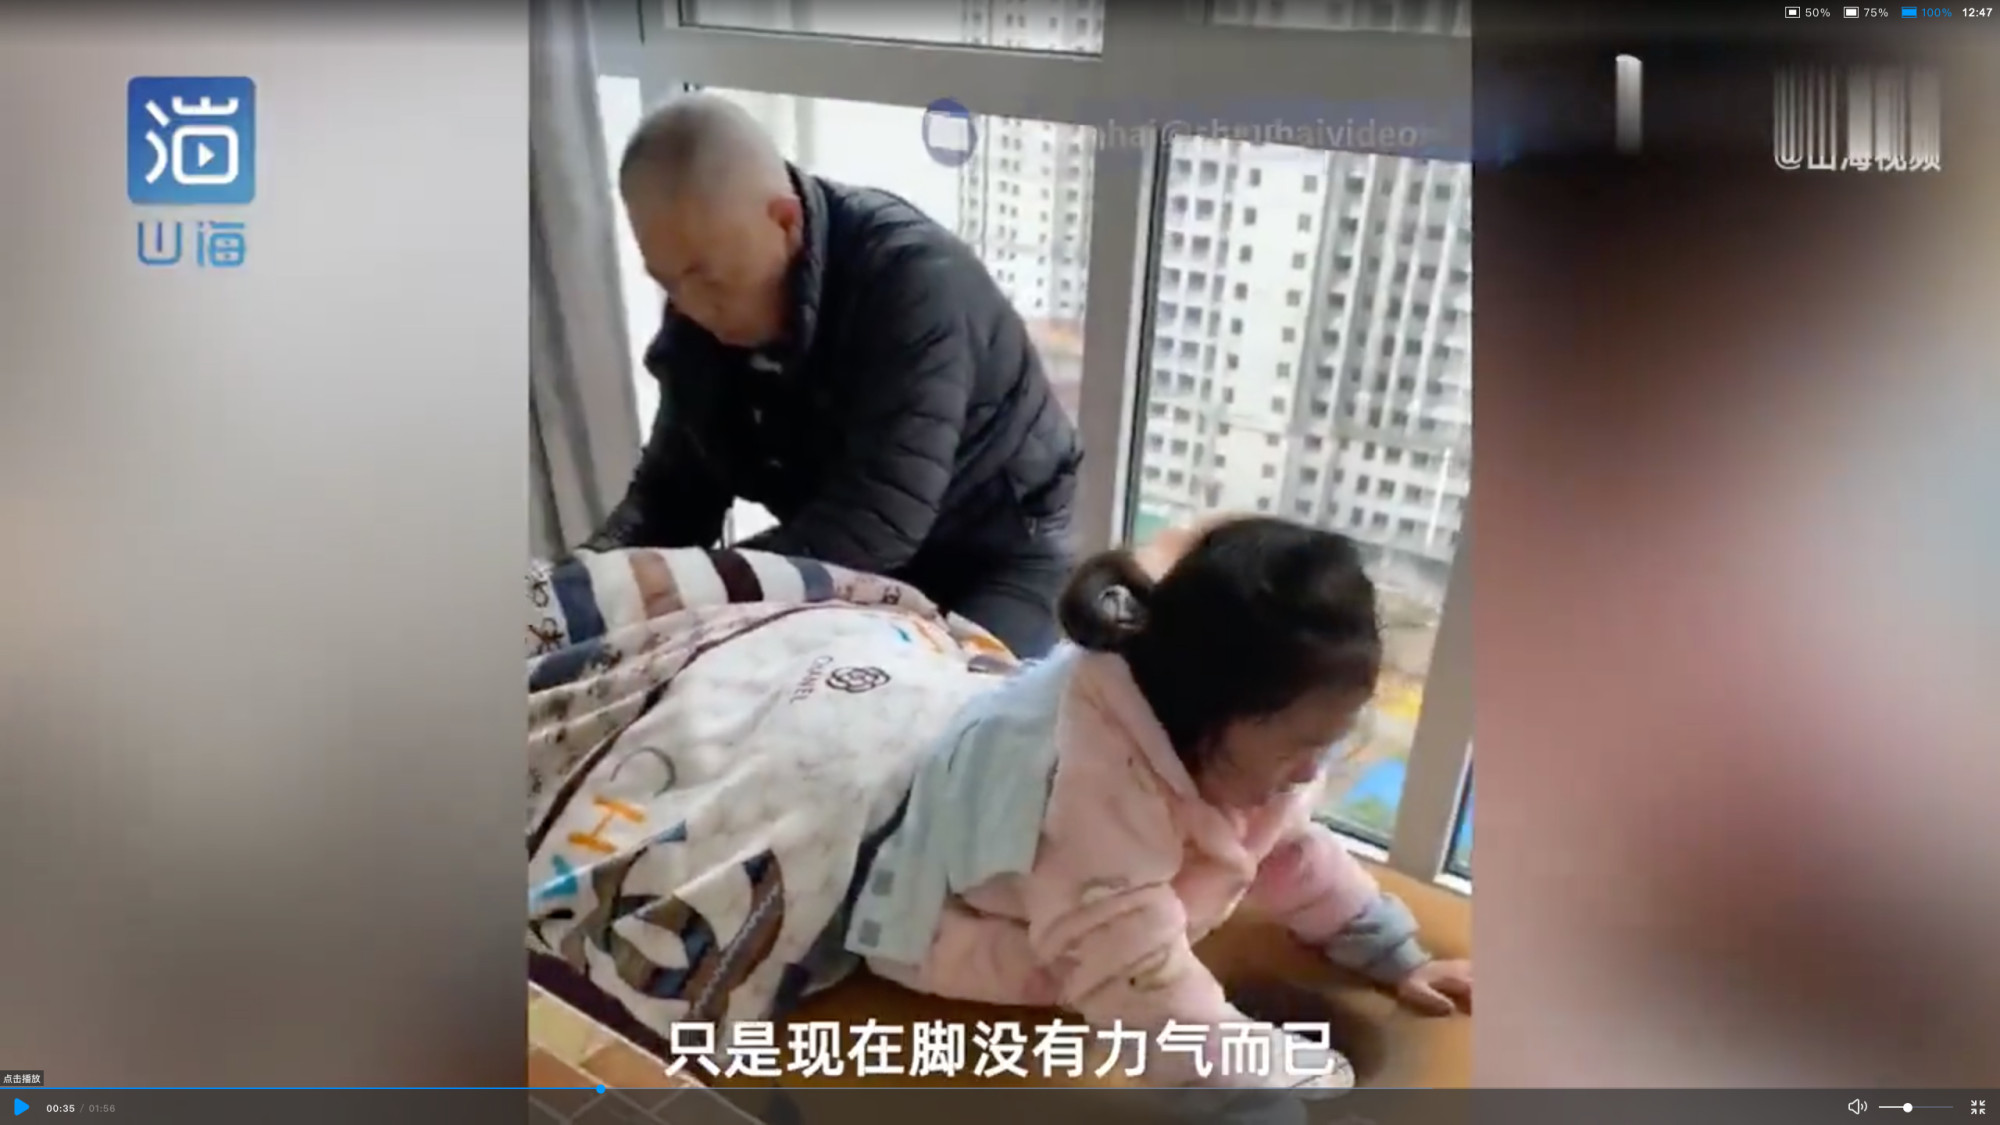 Anqi’s father gave her directions during her lengthy rehabilitation. Photo: Weibo